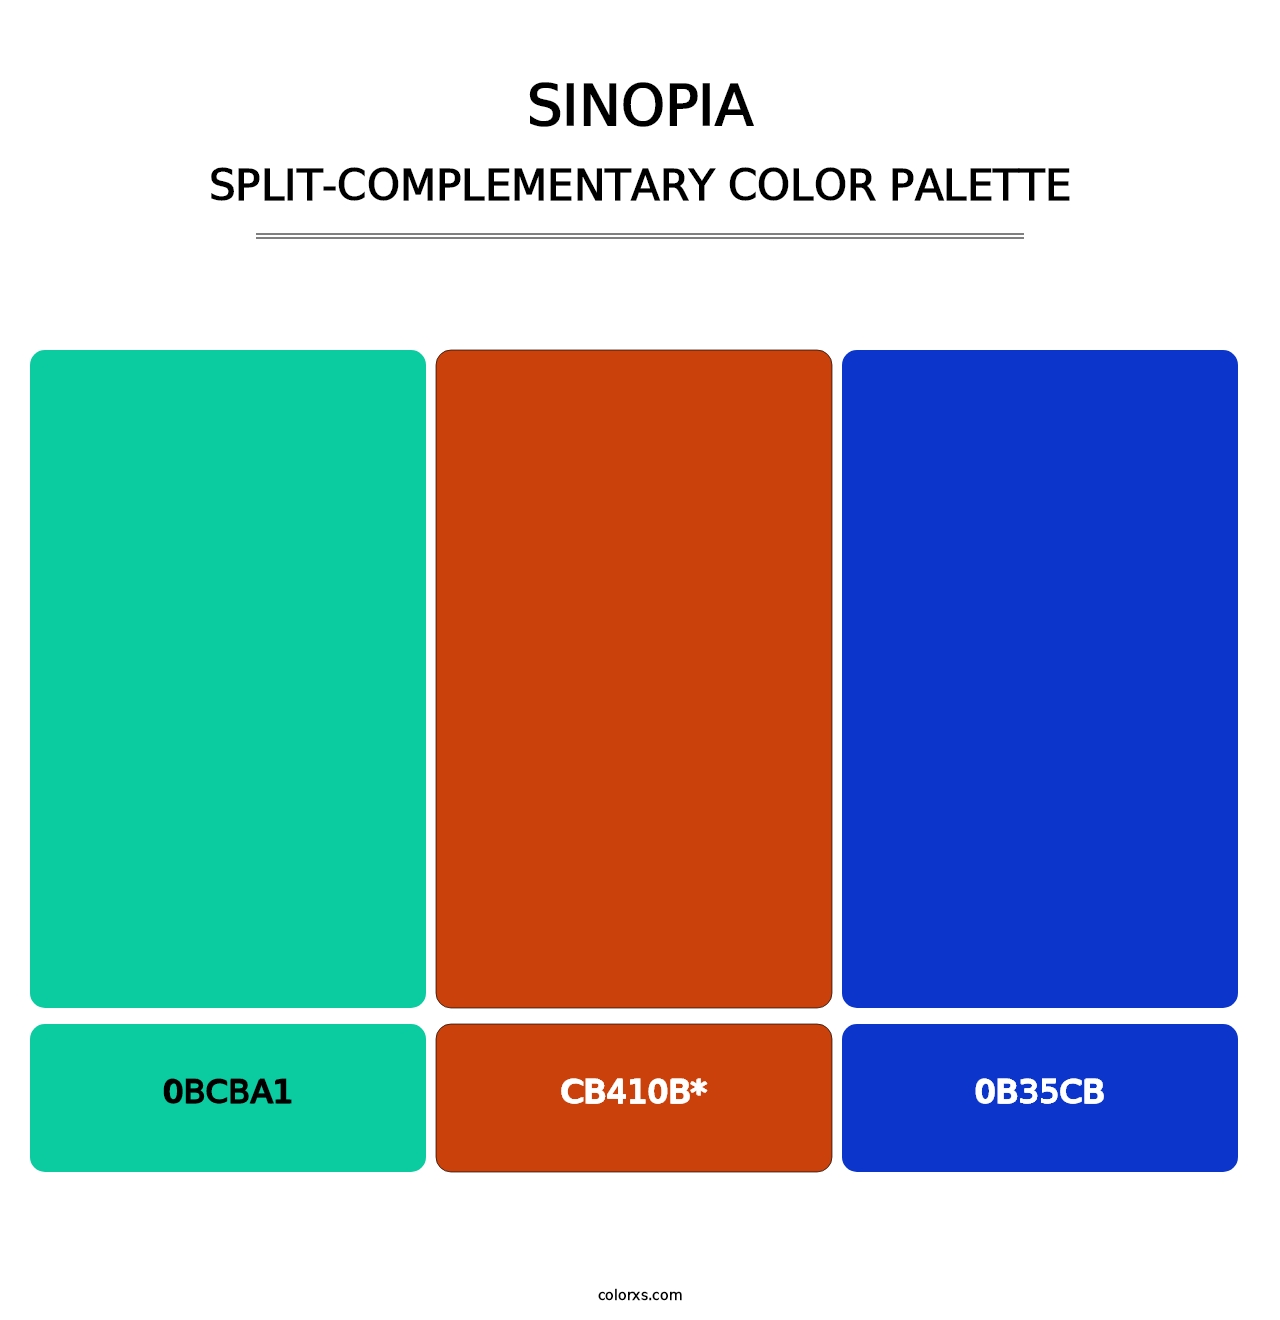 Sinopia - Split-Complementary Color Palette